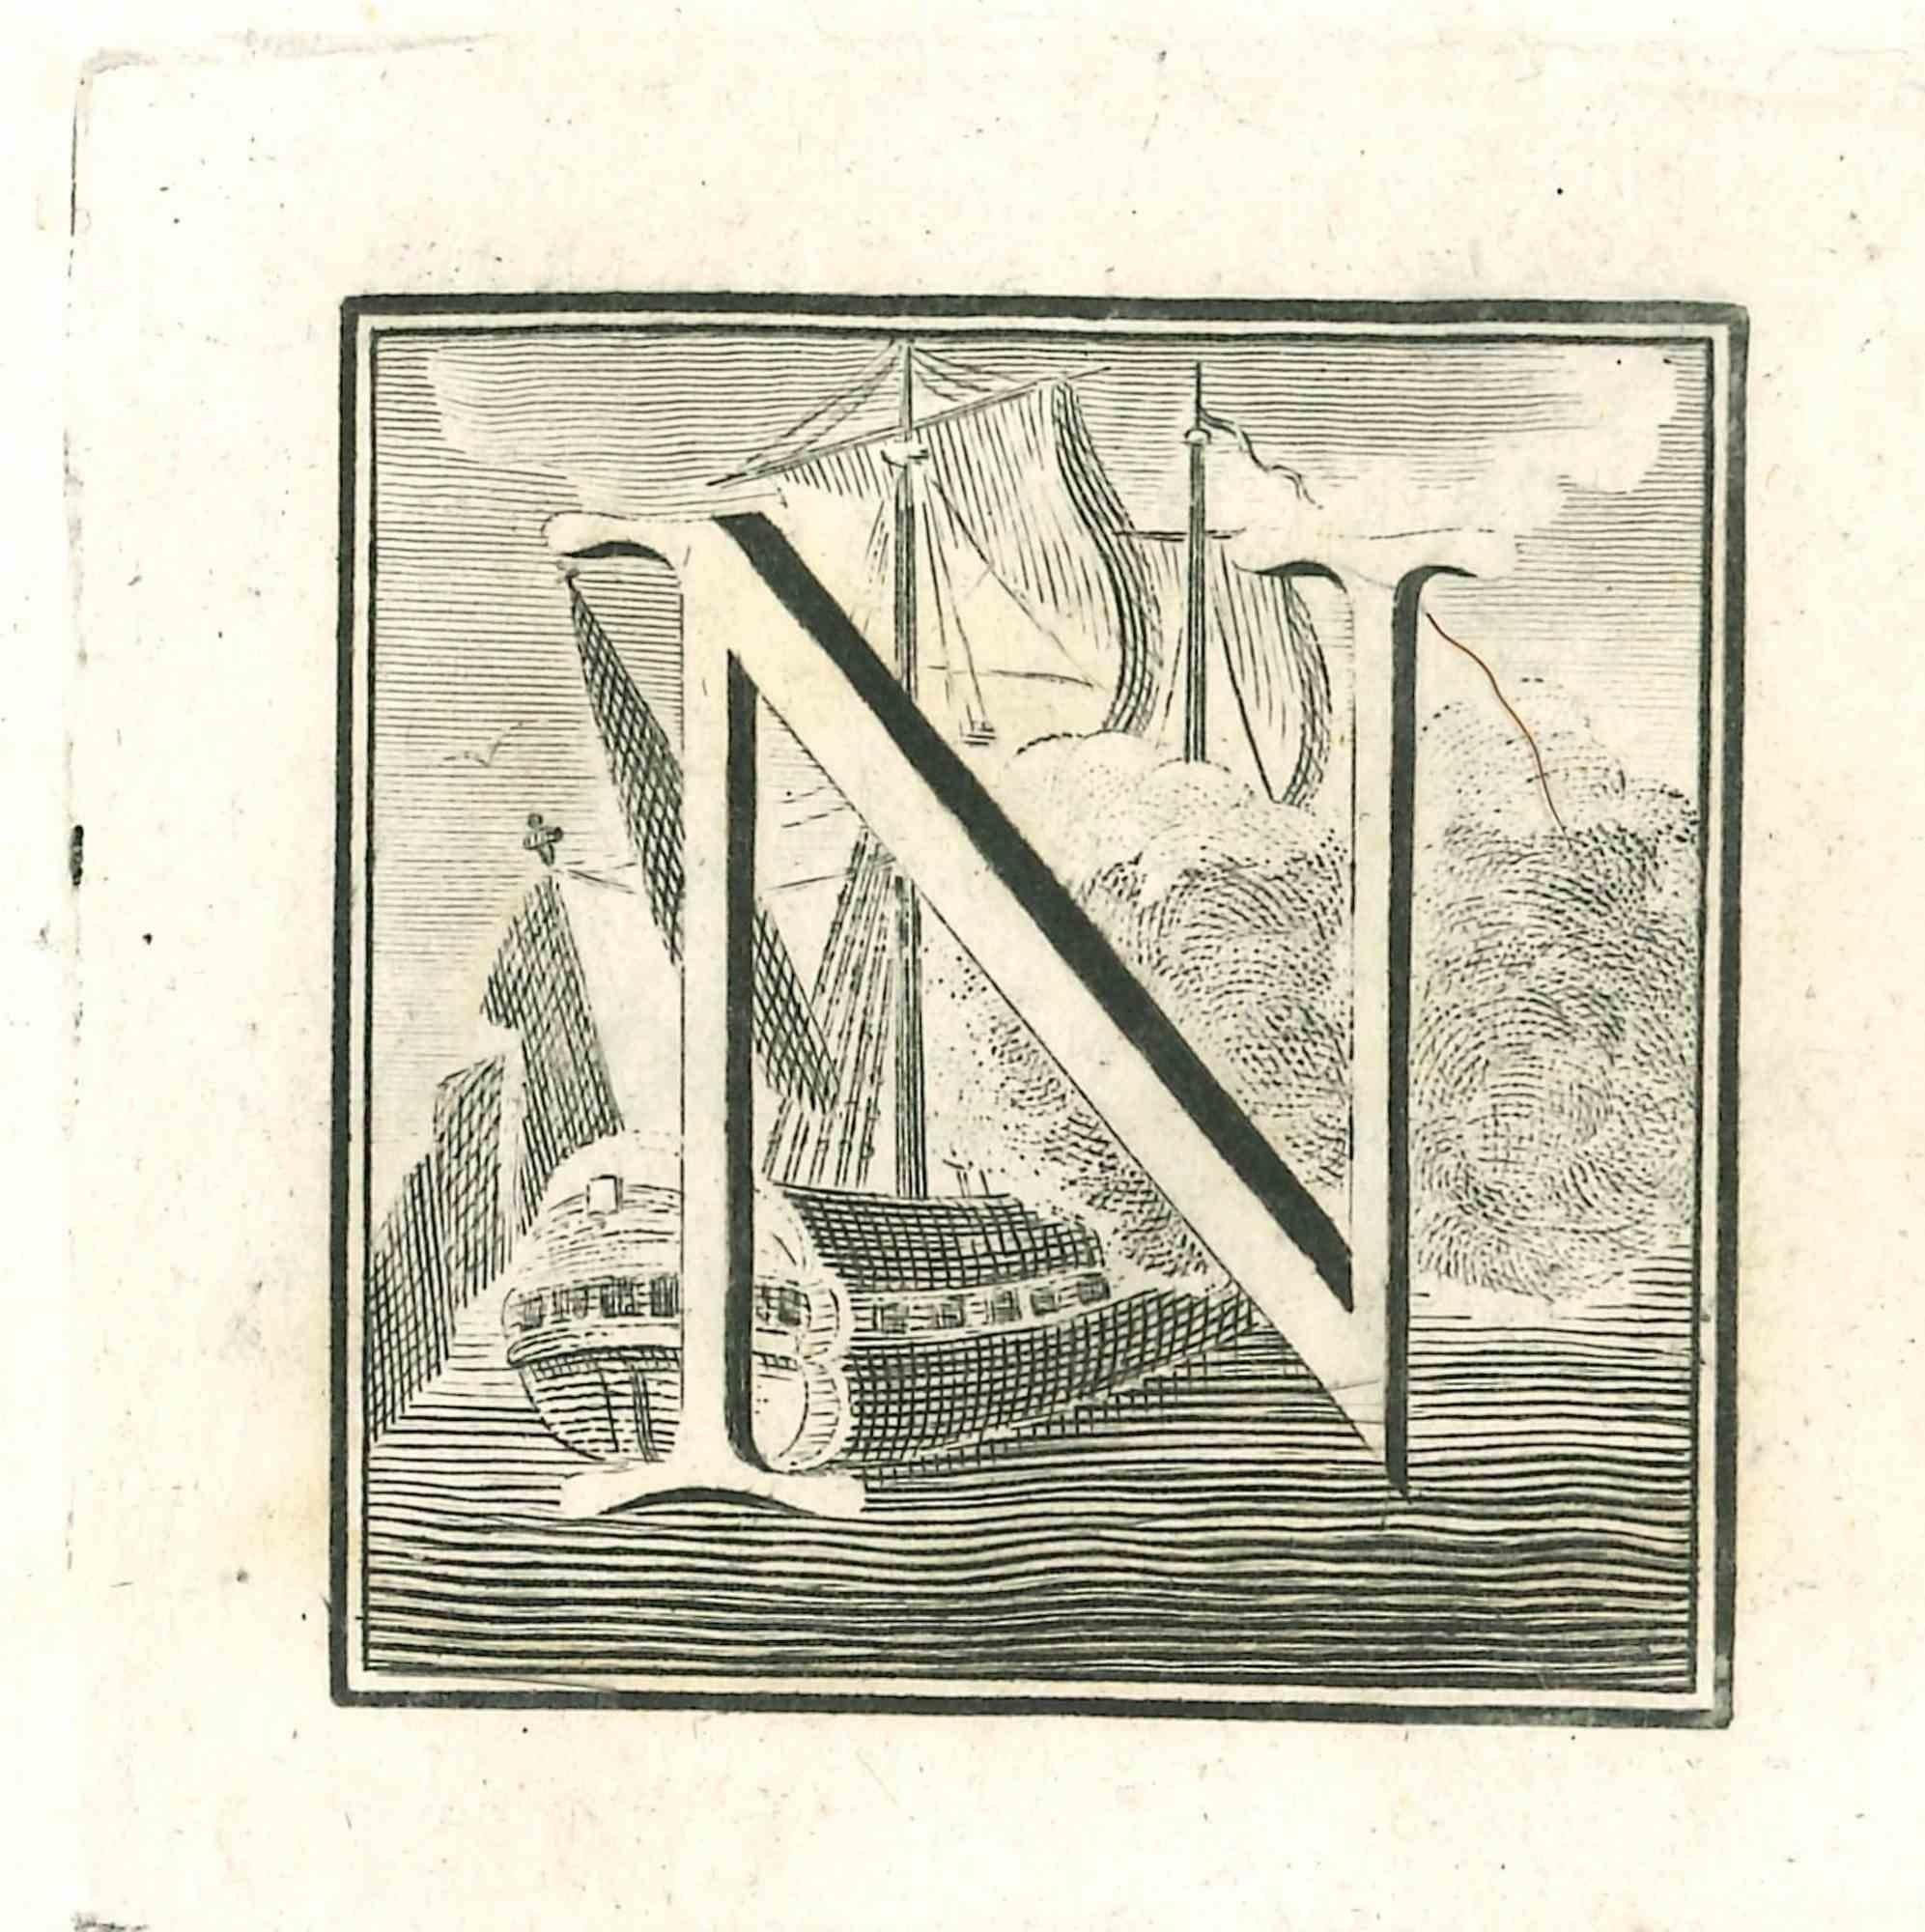 Capital Letter N from the Antiquities of Herculaneum - Etching - 18th Century